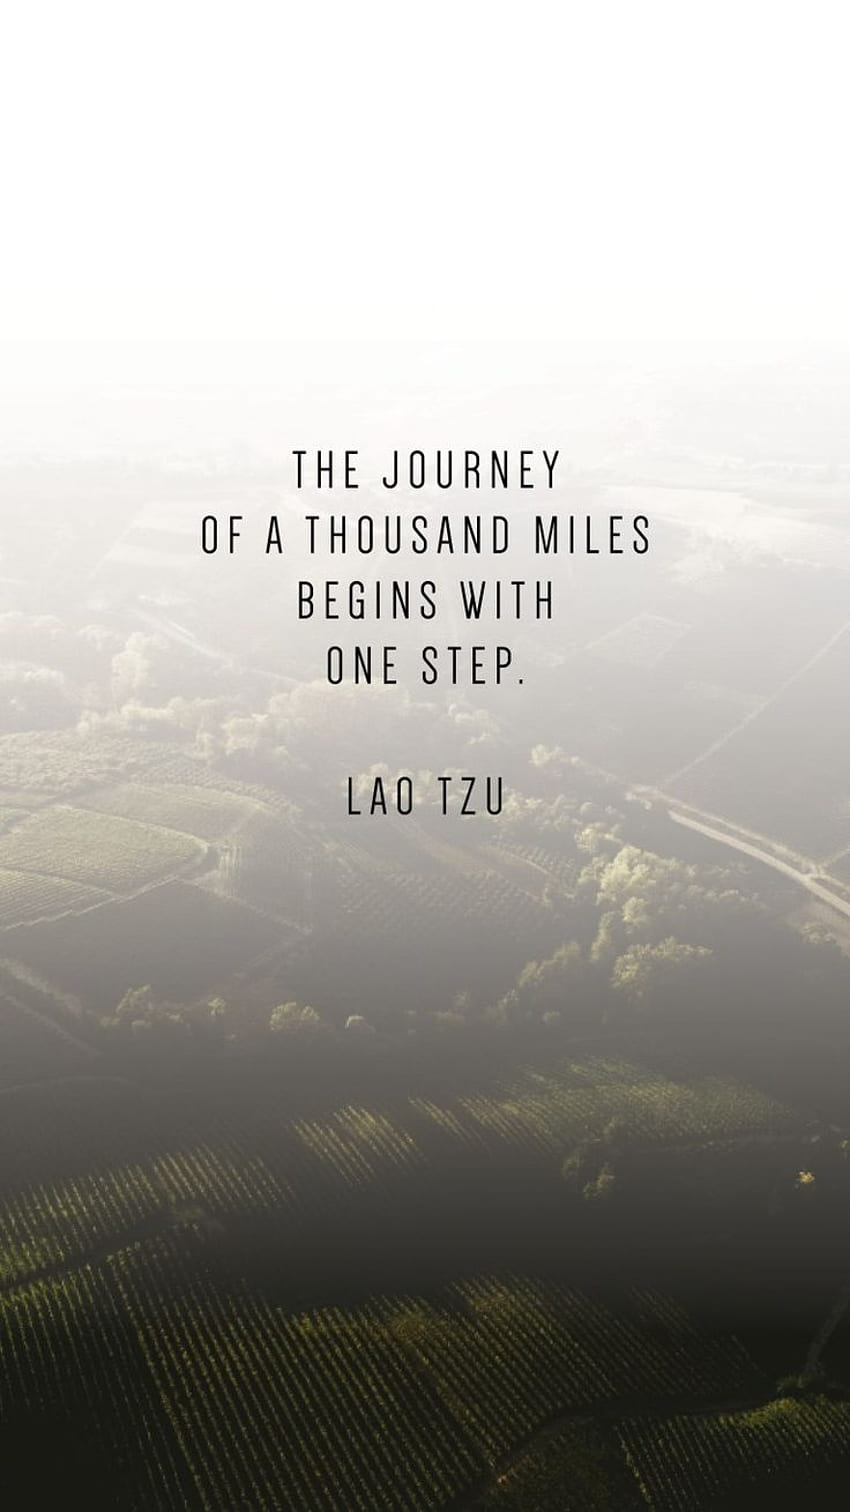 Phone Quotes To Inspire Your New Year Writing From Nowhere. Inspirational quotes, Lao tzu quotes, Phone quotes HD phone wallpaper